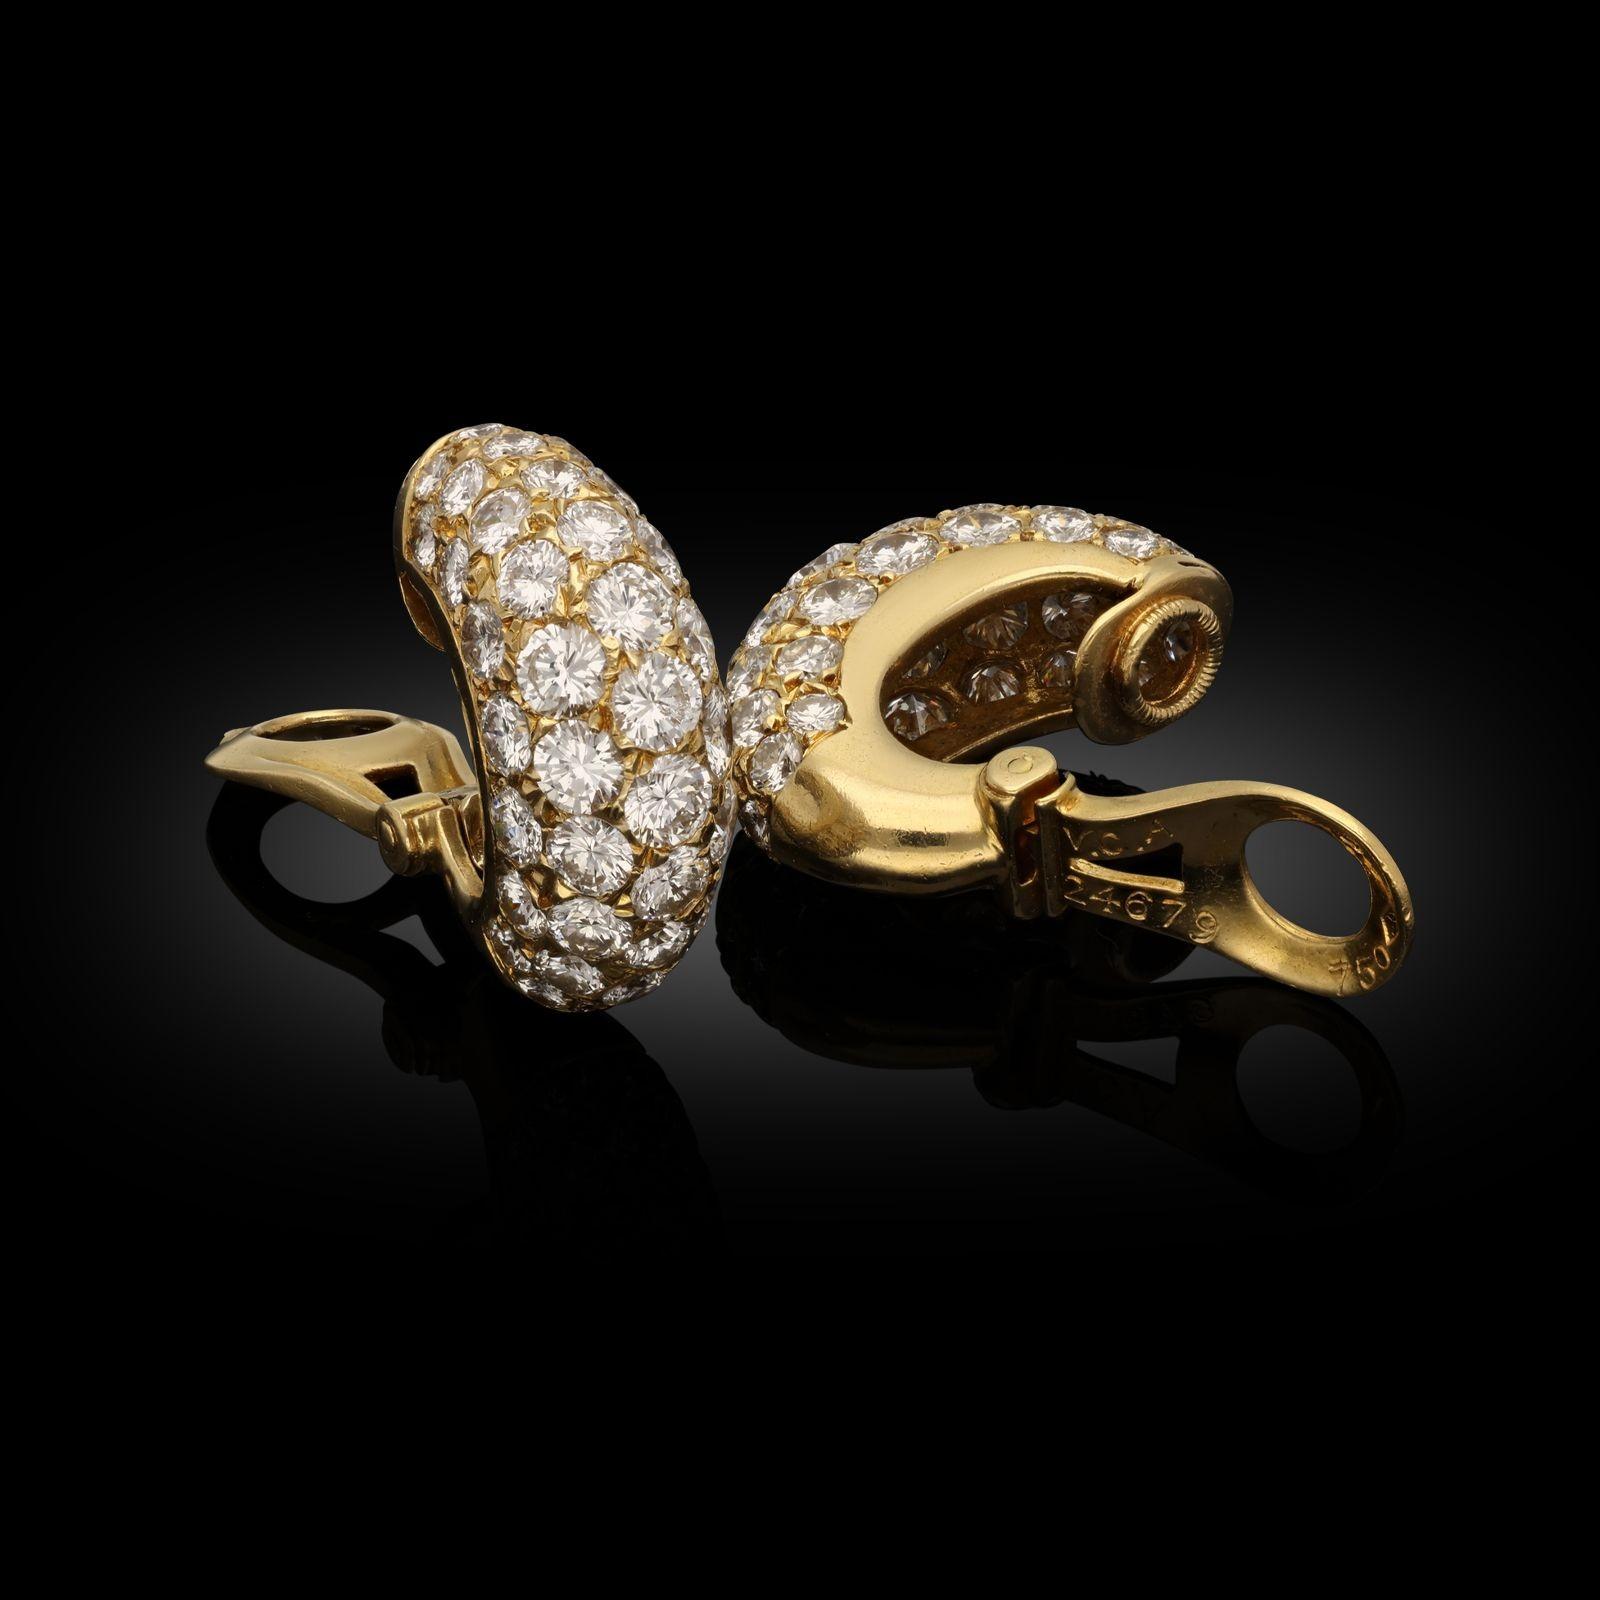 A beautiful pair of diamond hoop earrings by Van Cleef and Arpels c.1974, each earring designed as a high domed half-hoop earring in 18ct yellow gold pavé set with five rows of round brilliant cut diamonds, to post and clip fittings.  These